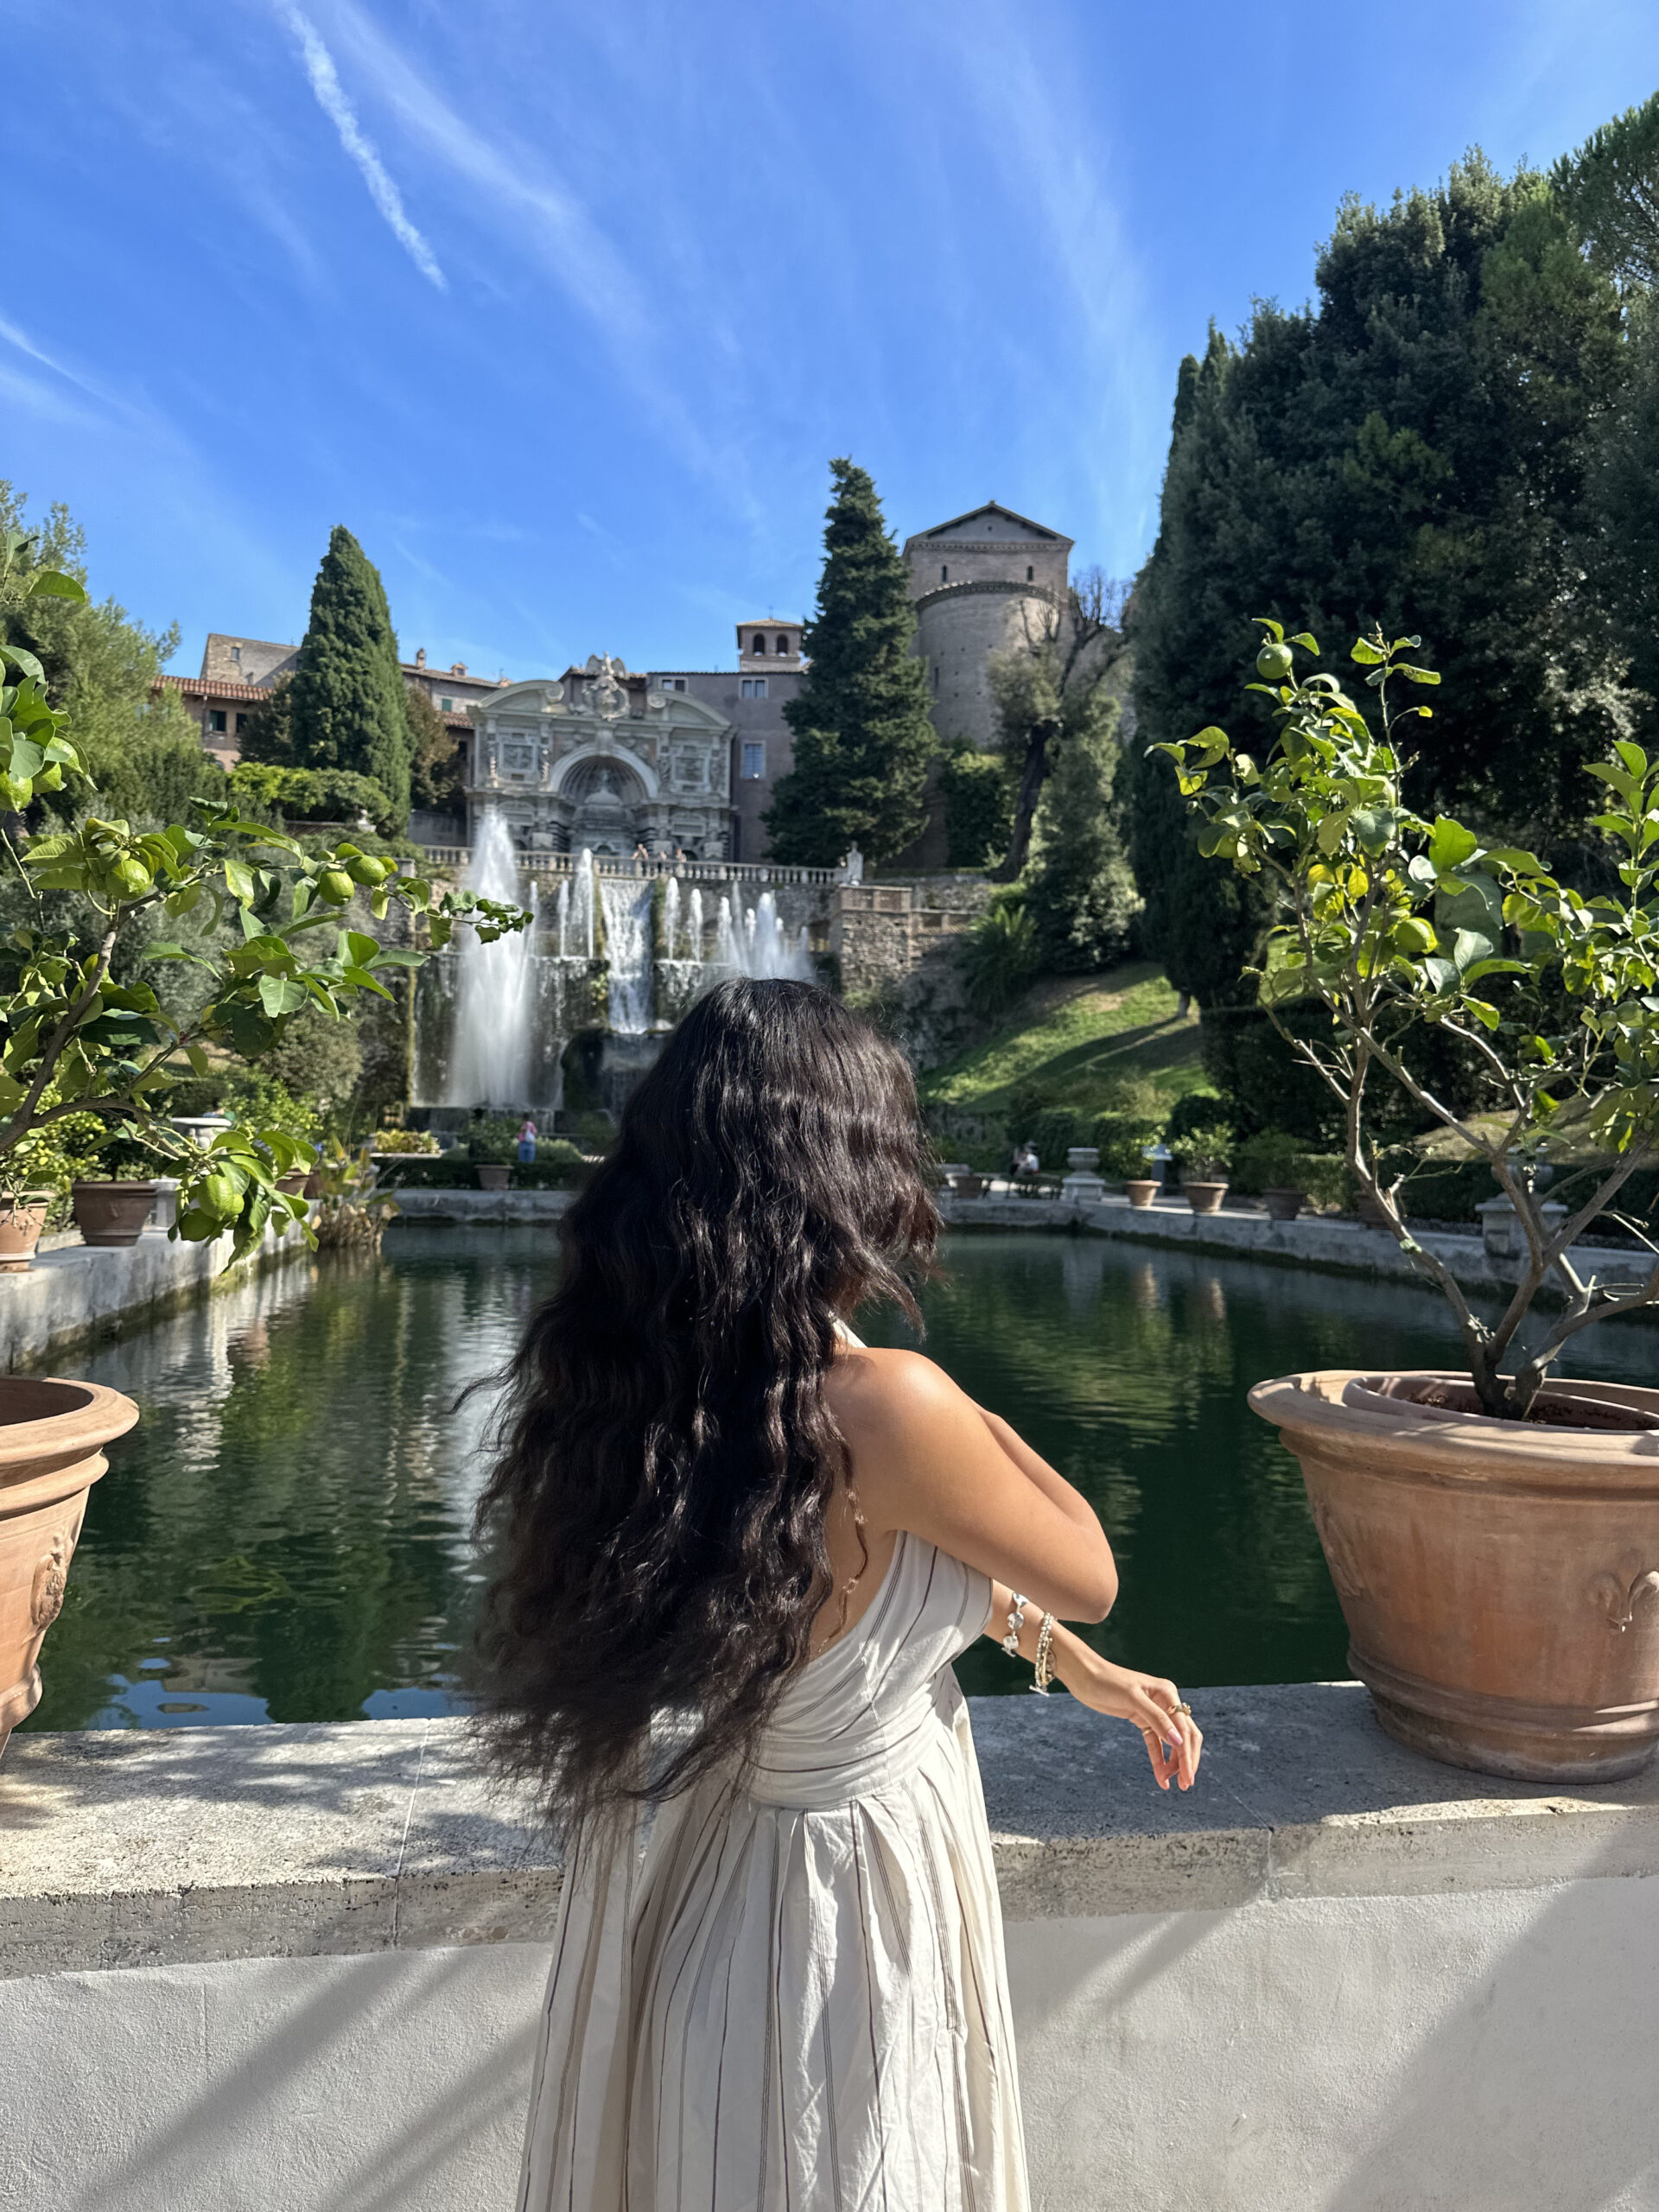 A month into Rome: Homesick and exploring alone